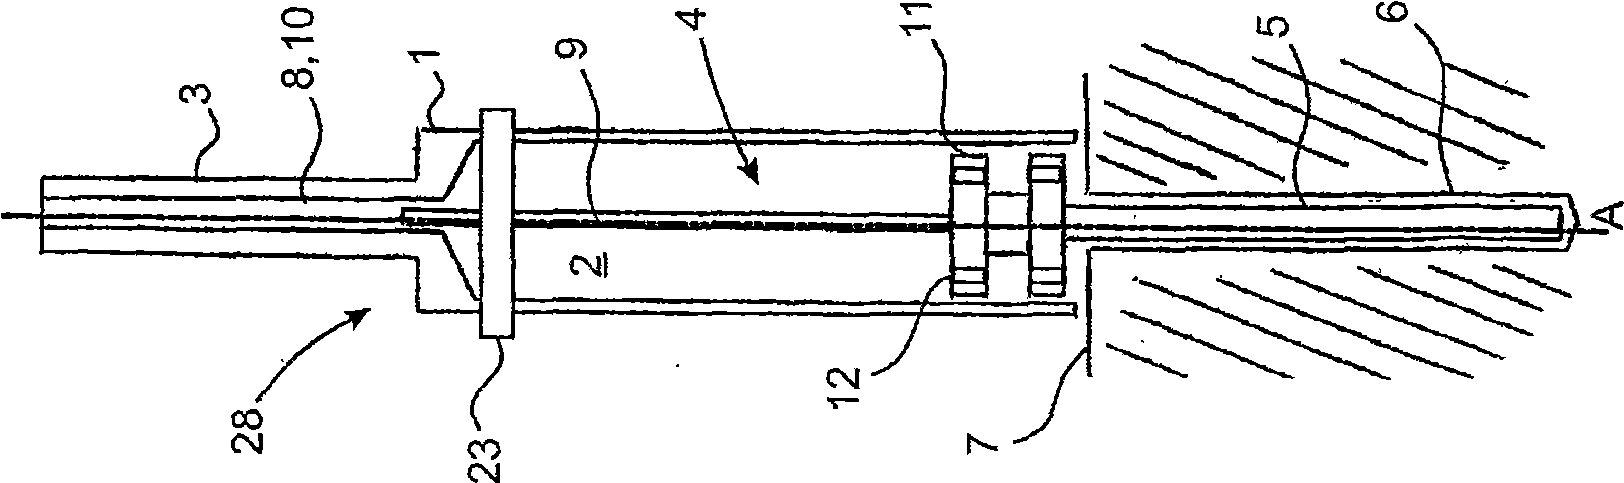 Trephine designed for removal of a bone core and equipped with a device guiding it inside the bone and combining a drill bit and a tubular cutting tool